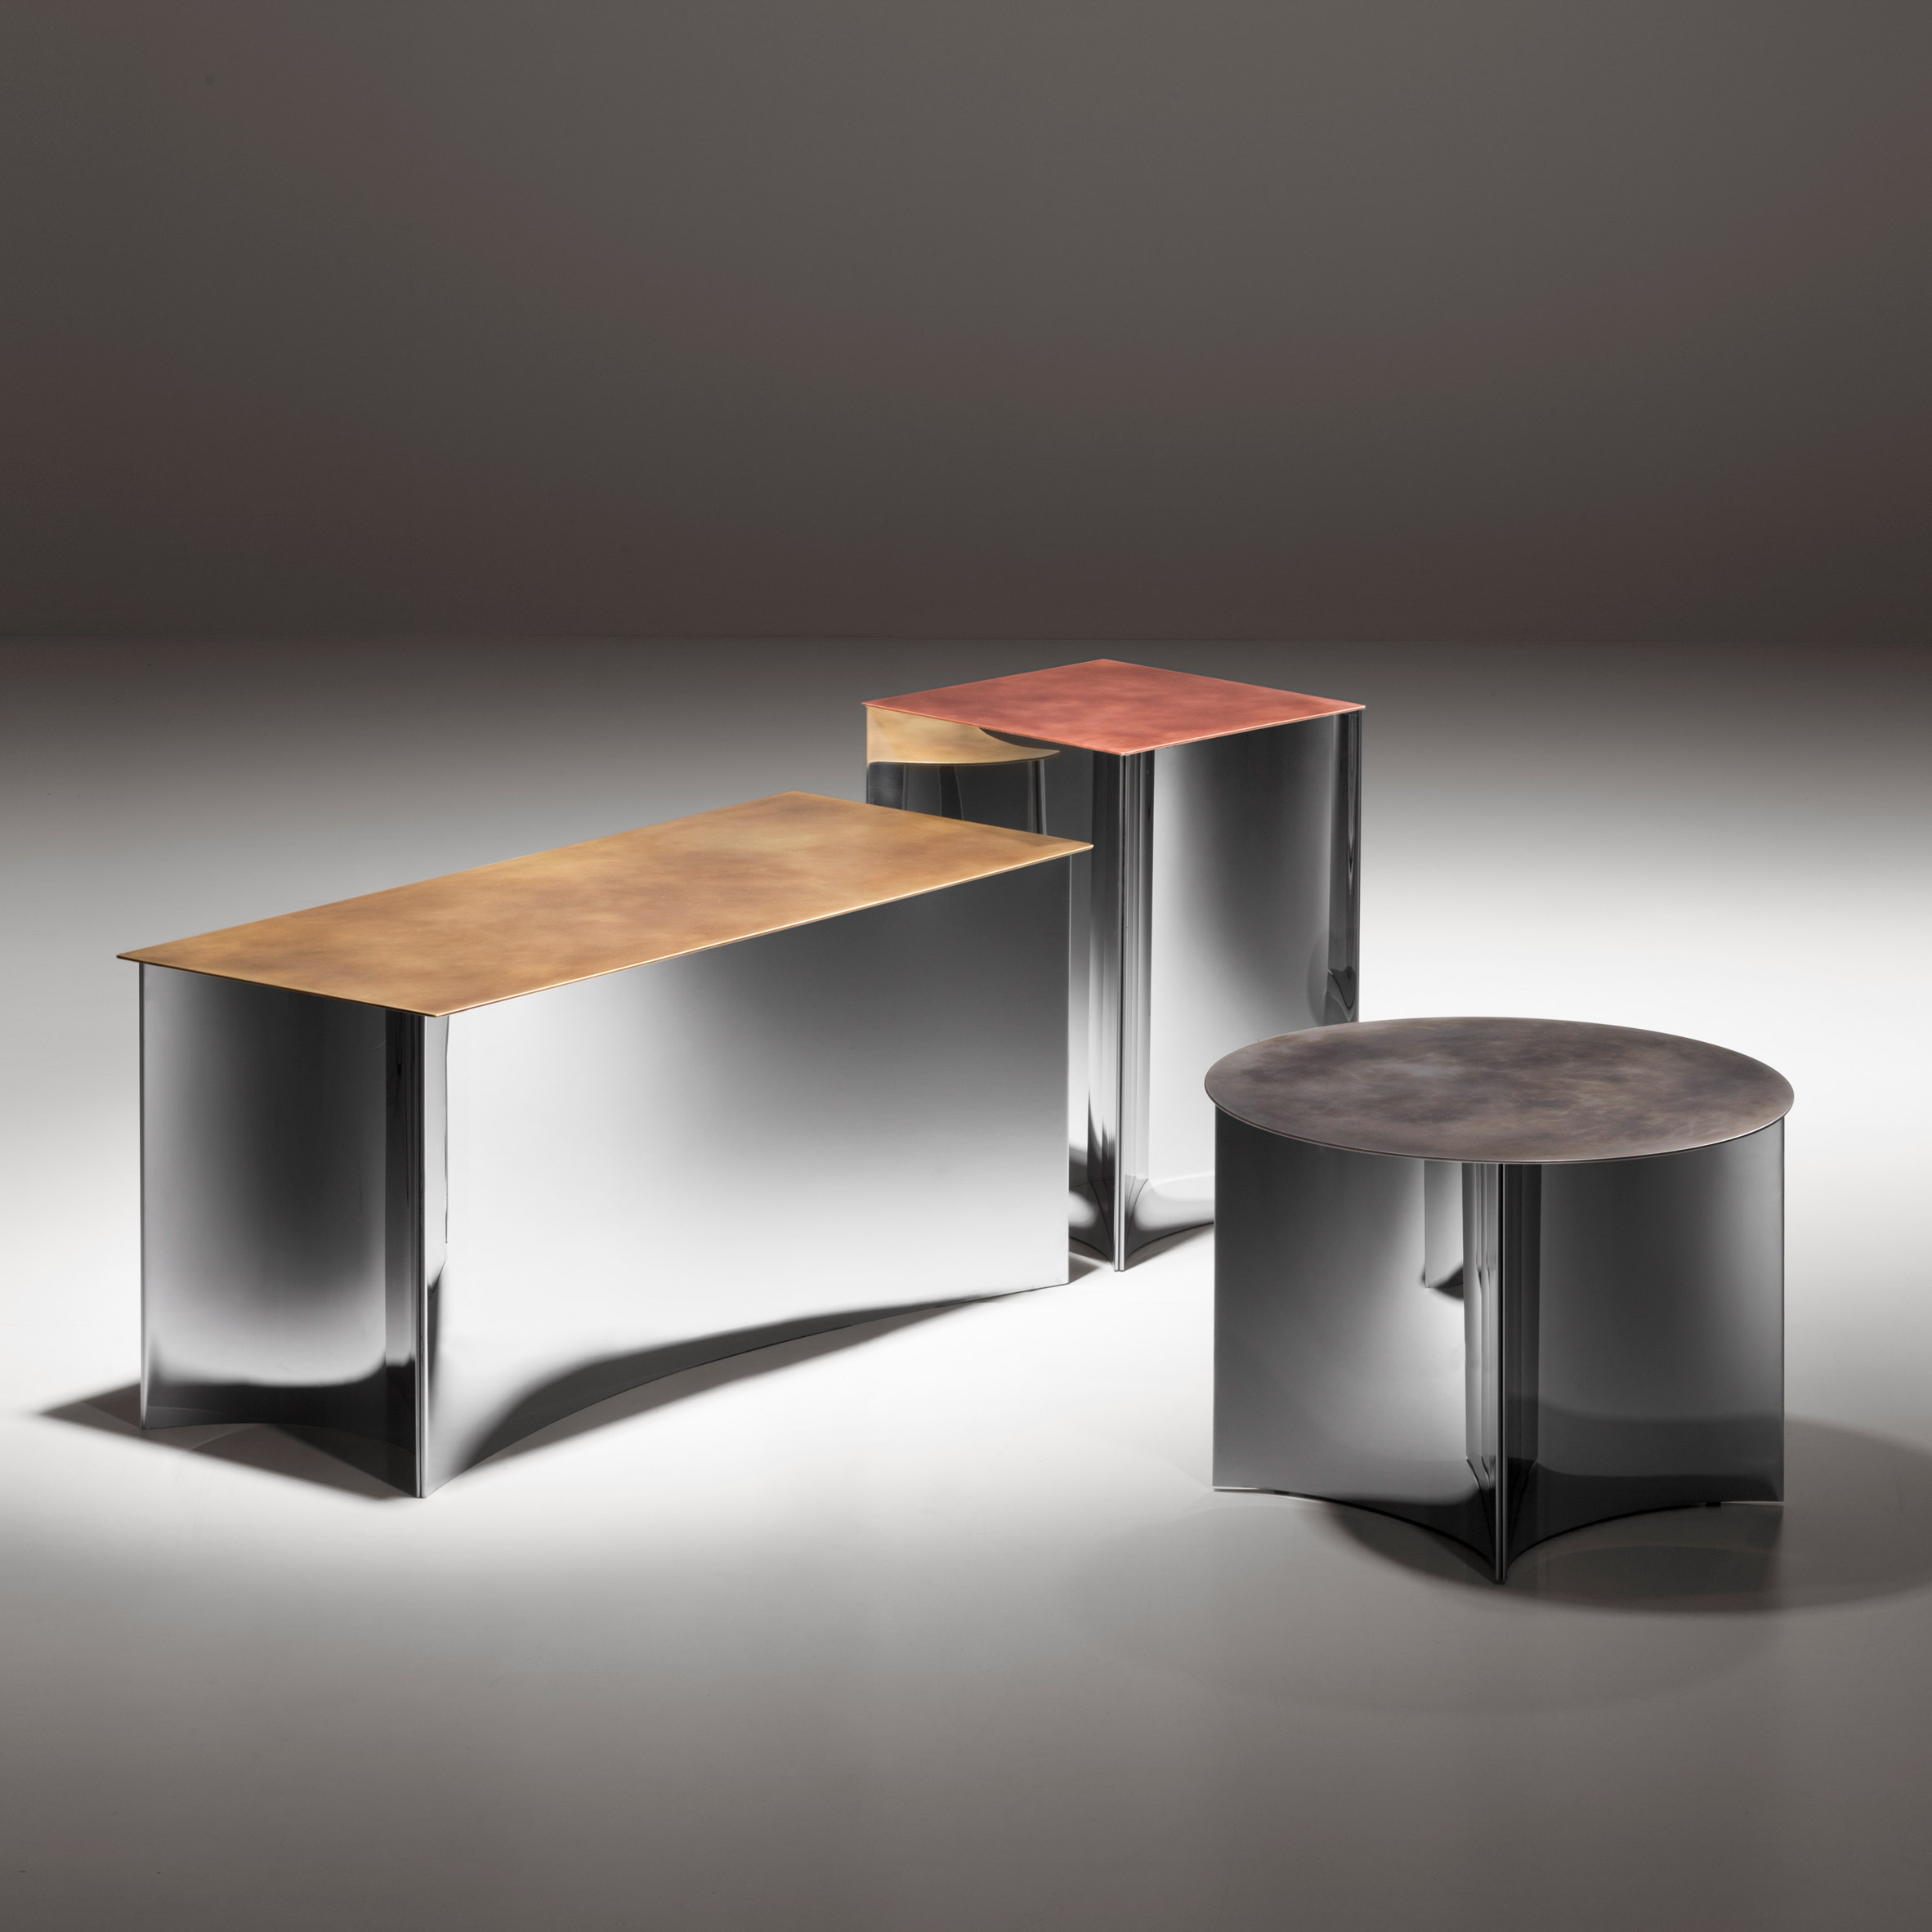 Alchemy side tables by Stormo for De Castelli